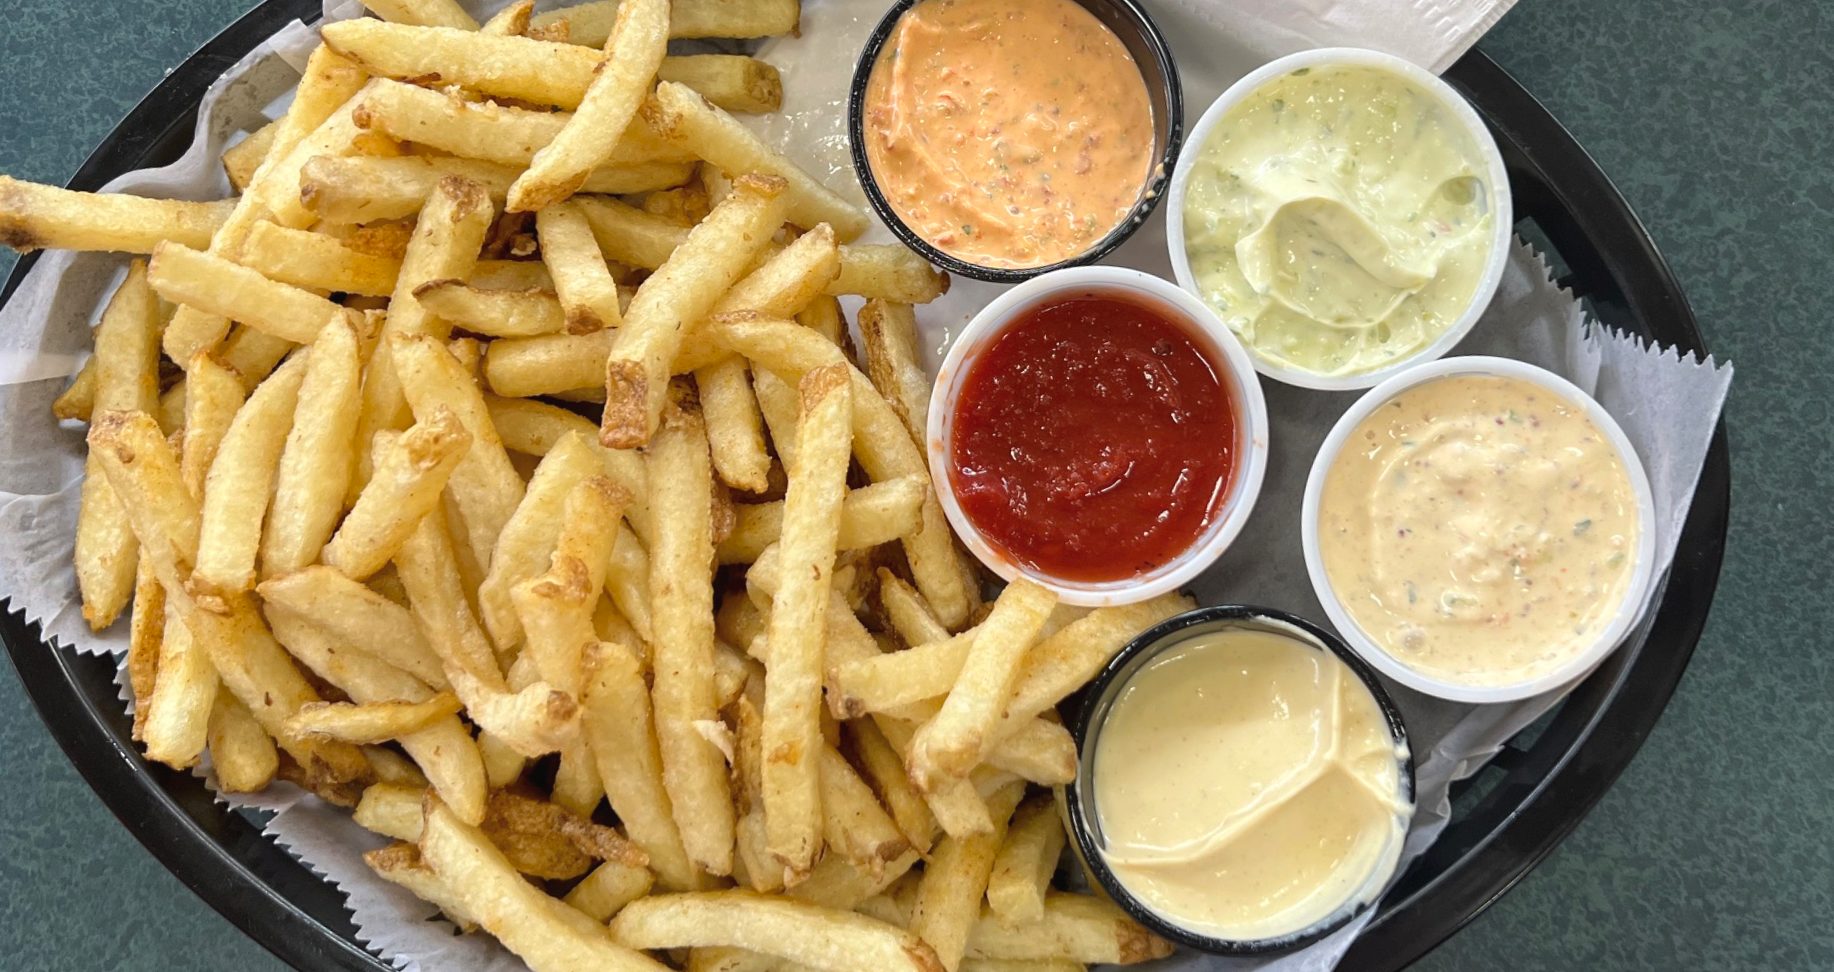 A black tray with fries and five sauces (orange, light green, deep red, yellow-orange, and yellow).